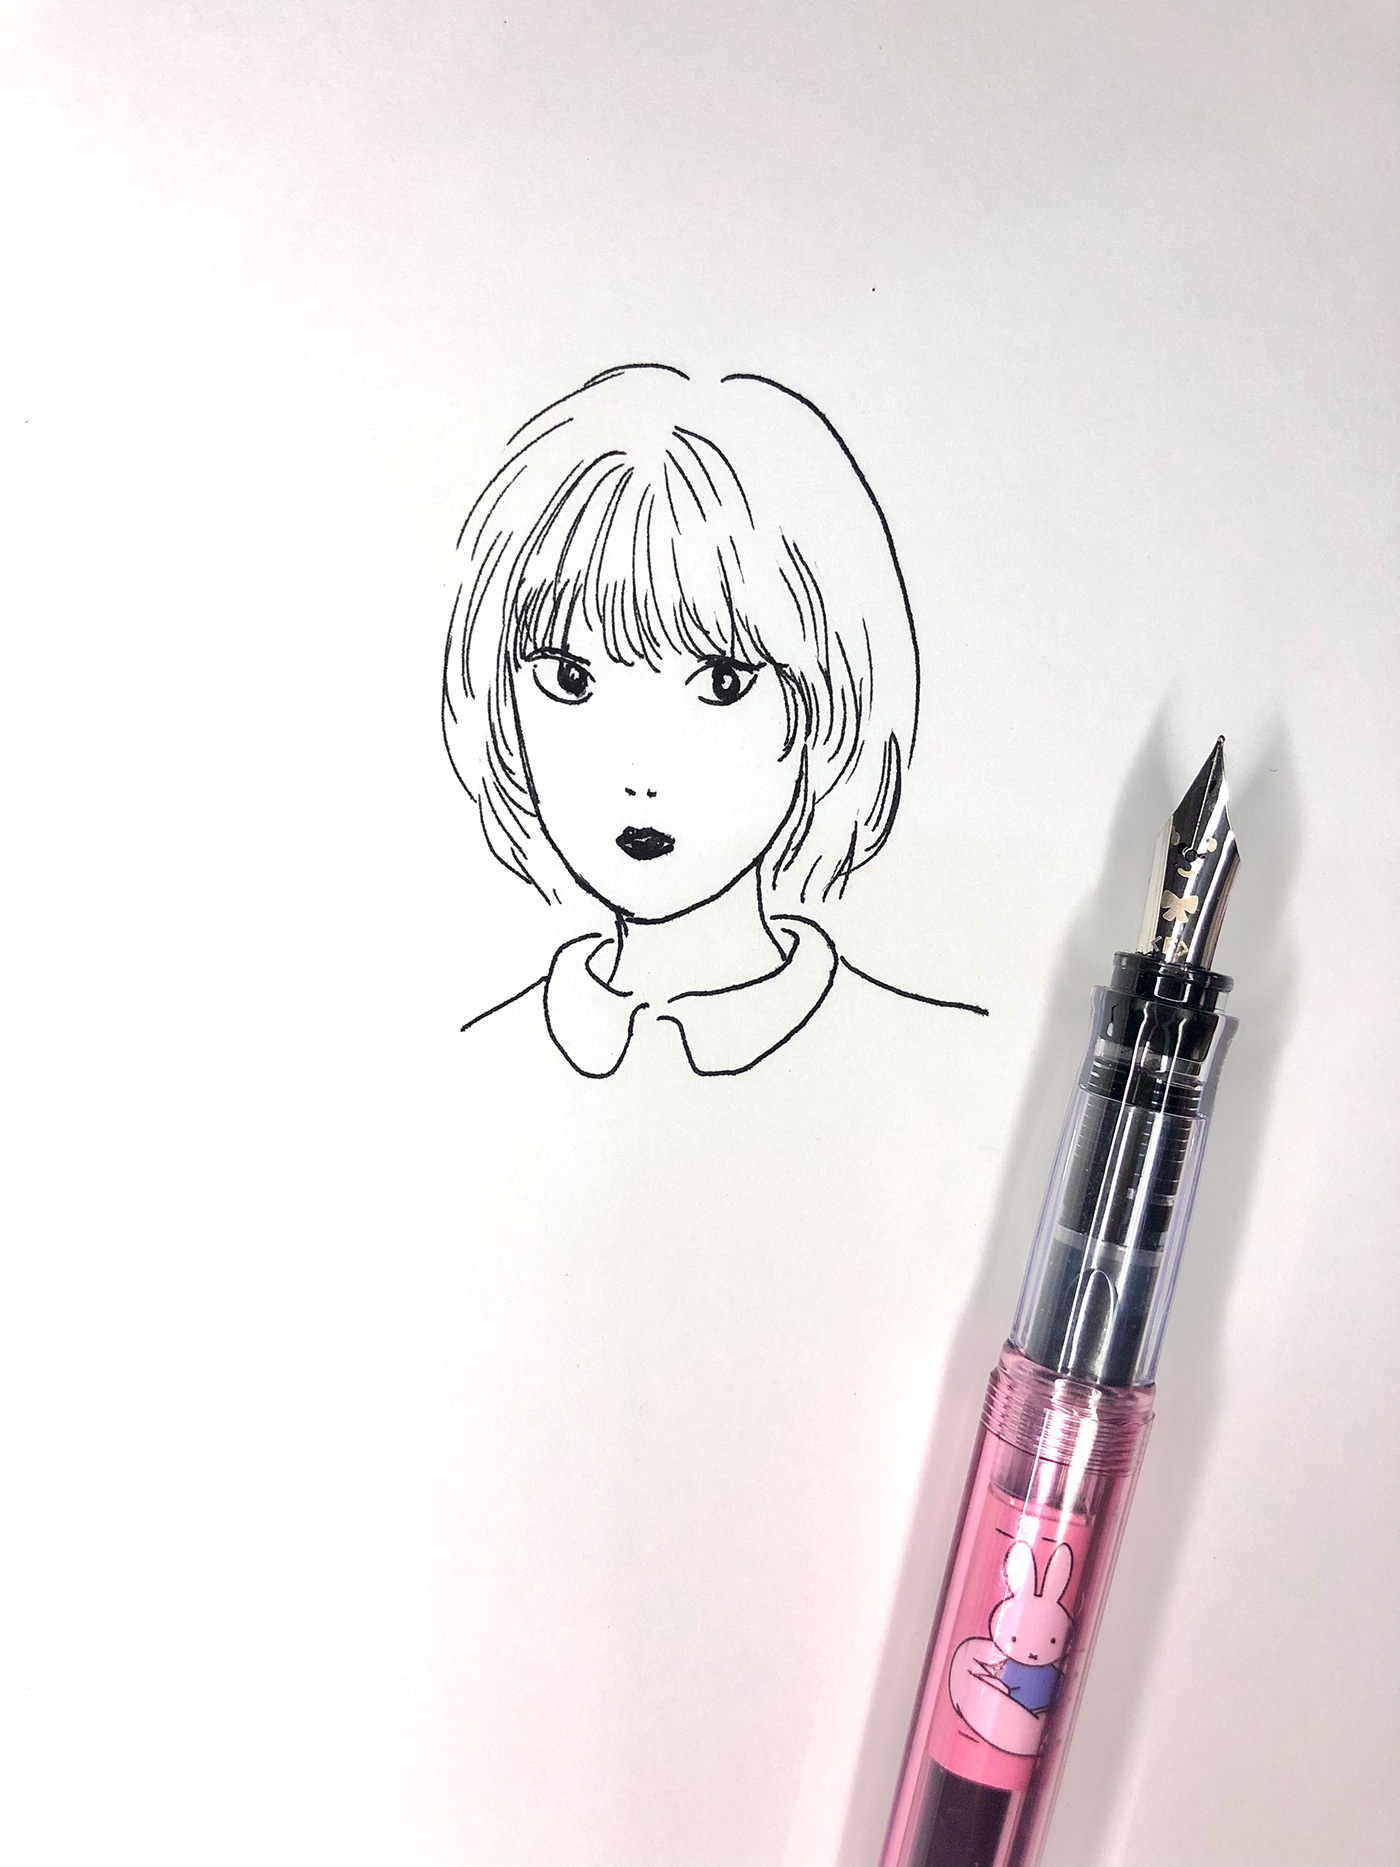 sketch art paper sketchbook ink black ink Expression face expression black and white bw girl woman portrait PORTRAIT DRAWING Minimalism happy Poker Face girl portrait asian comic line art line drawing asia Hong Kong sketches quick sketch free hand hand drawing Dairy doodle fountain pen short hair сад 晩冬 패키지